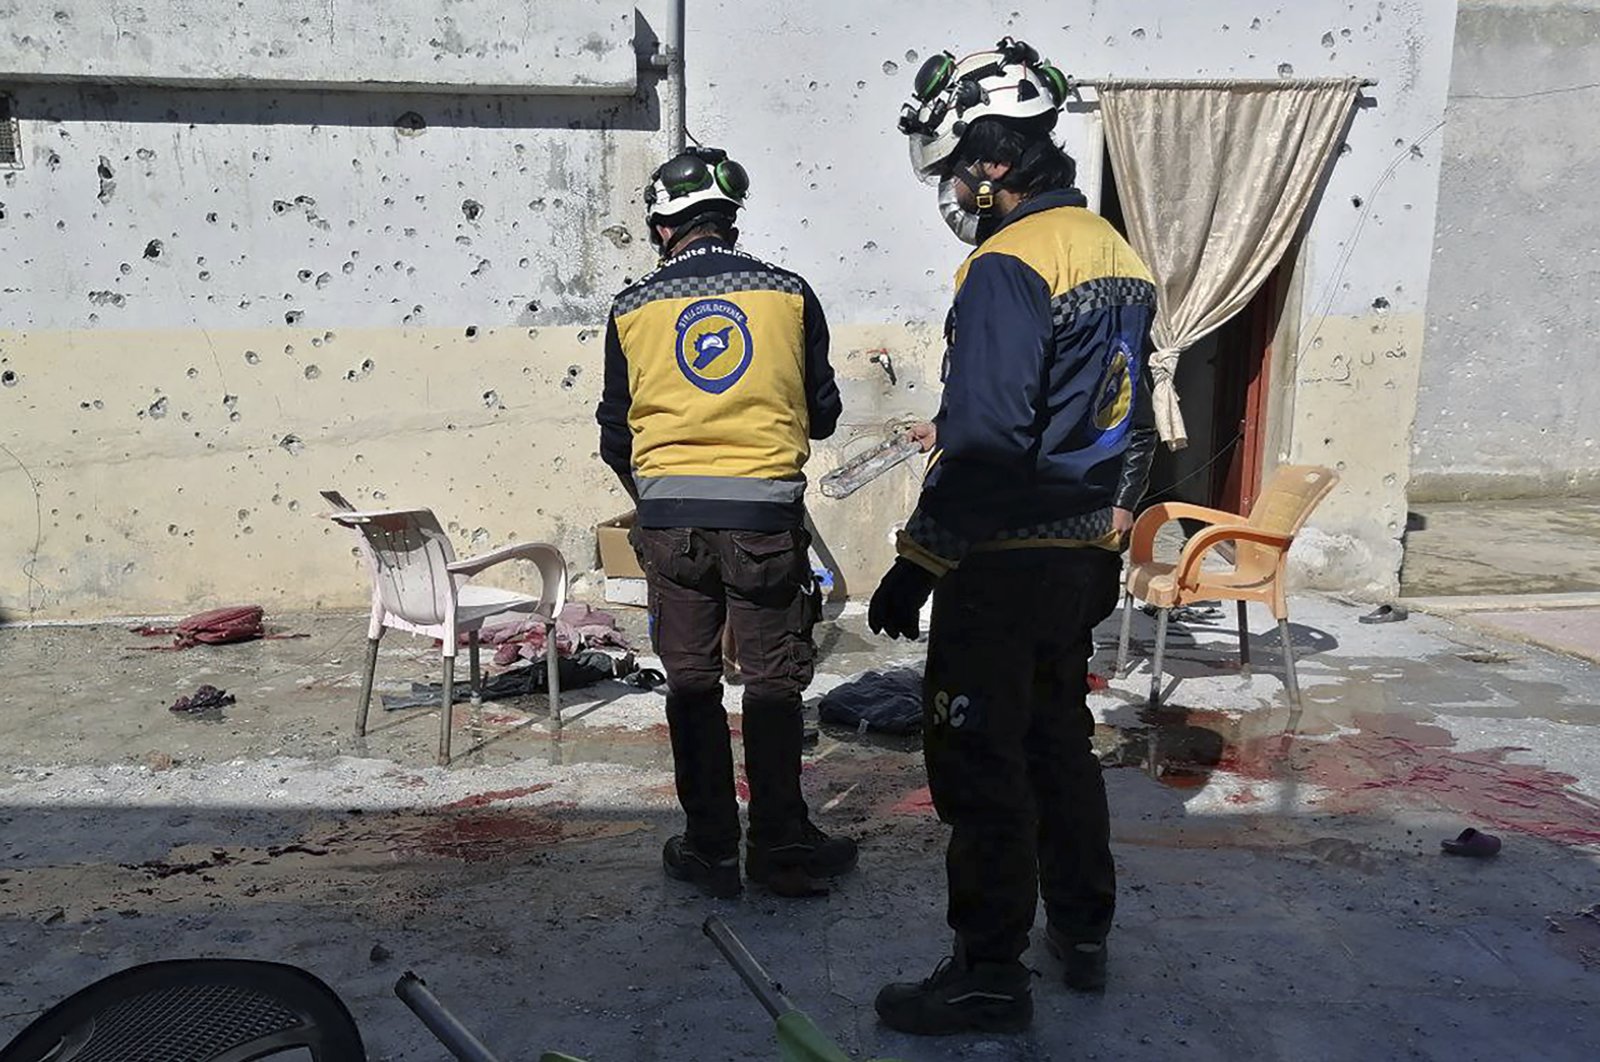 In this photo provided by the Syrian Civil Defense White Helmets, which has been authenticated based on its contents and other AP reporting, Syrian White Helmet civil defense workers stand at the site where a shell struck in the Maaret al-Naasan village in Idlib province, Syria, Saturday, Feb. 12, 2022. (Syrian Civil Defense White Helmets via AP)